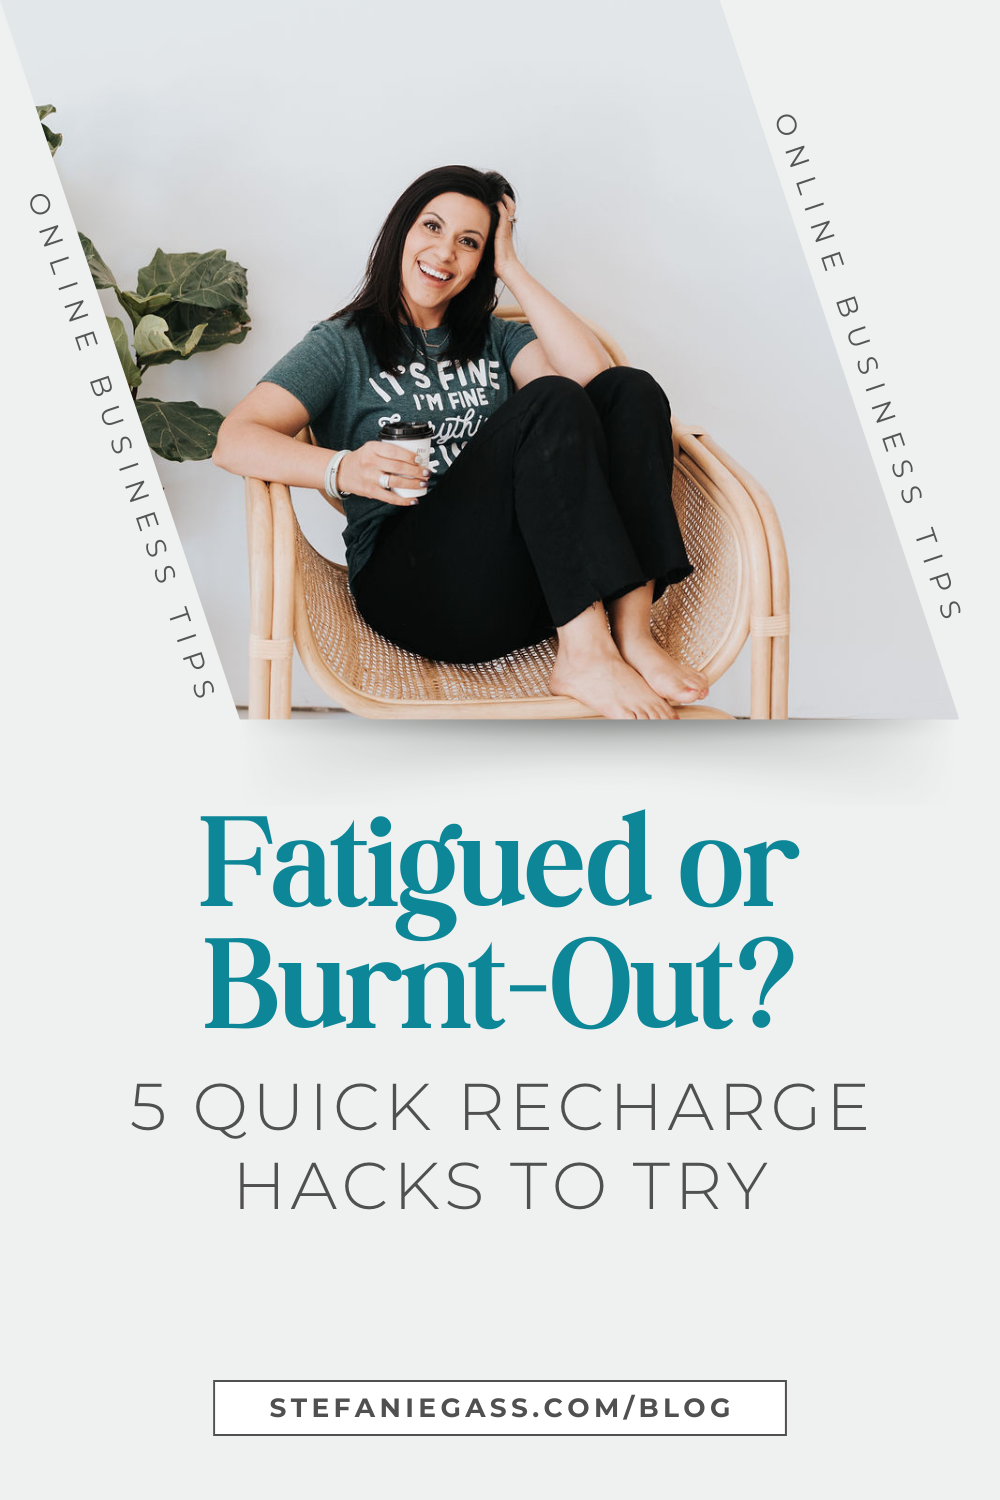 brown haired woman sitting in chair with drink in hand, wearing a teal t-shirt and black pants. Text says "Fatigued or burnt-out? 5 Quick recharge hacks to try"